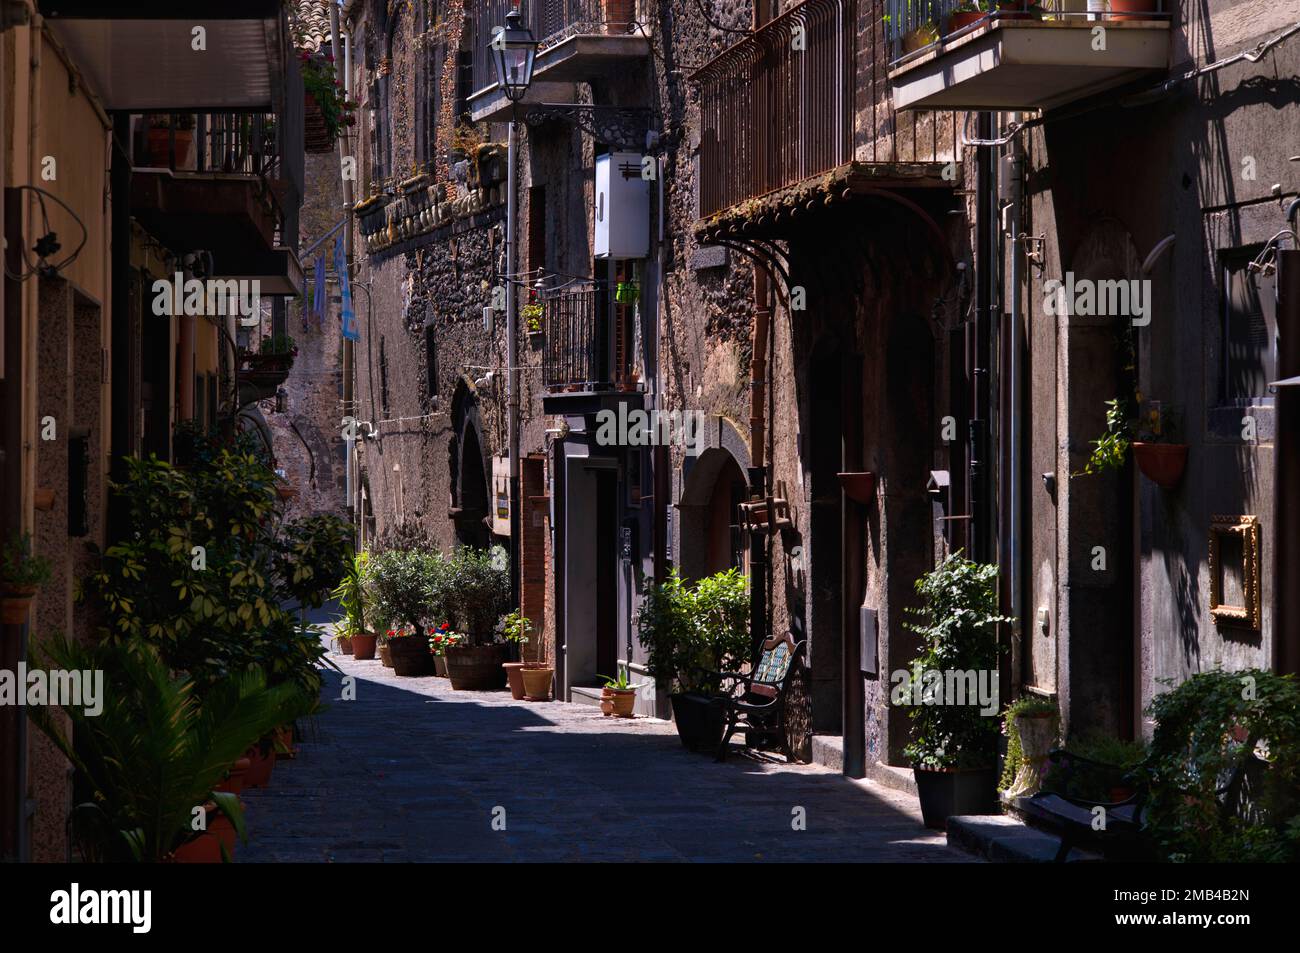 Volcanic stone houses, alley decorated with flowers, cobblestones, old town, Randazzo, Sicily, Italy Stock Photo